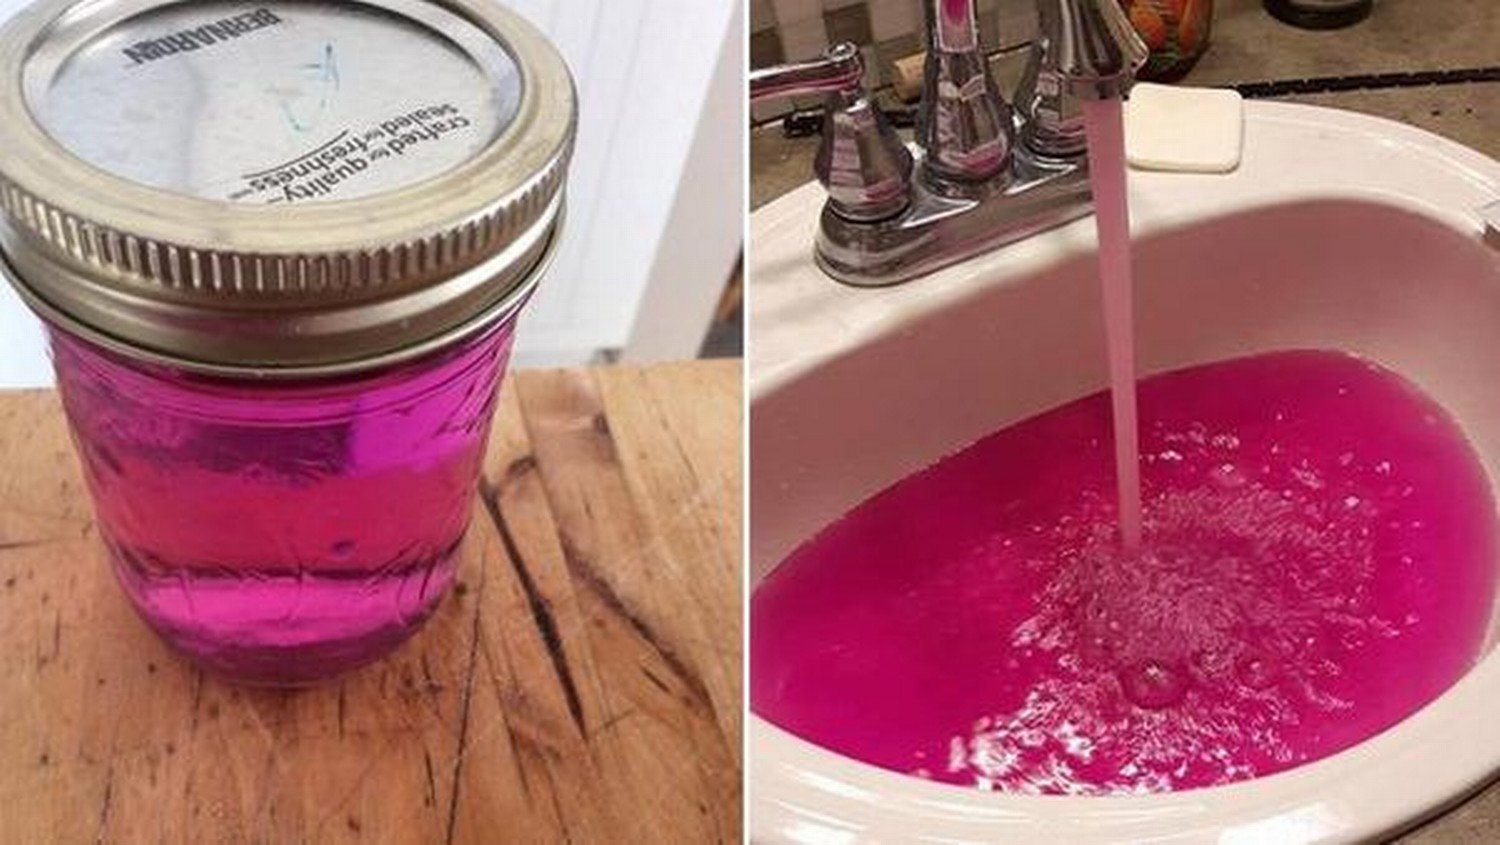 Pink water from the tap in Canadian village - Hot Recent News.